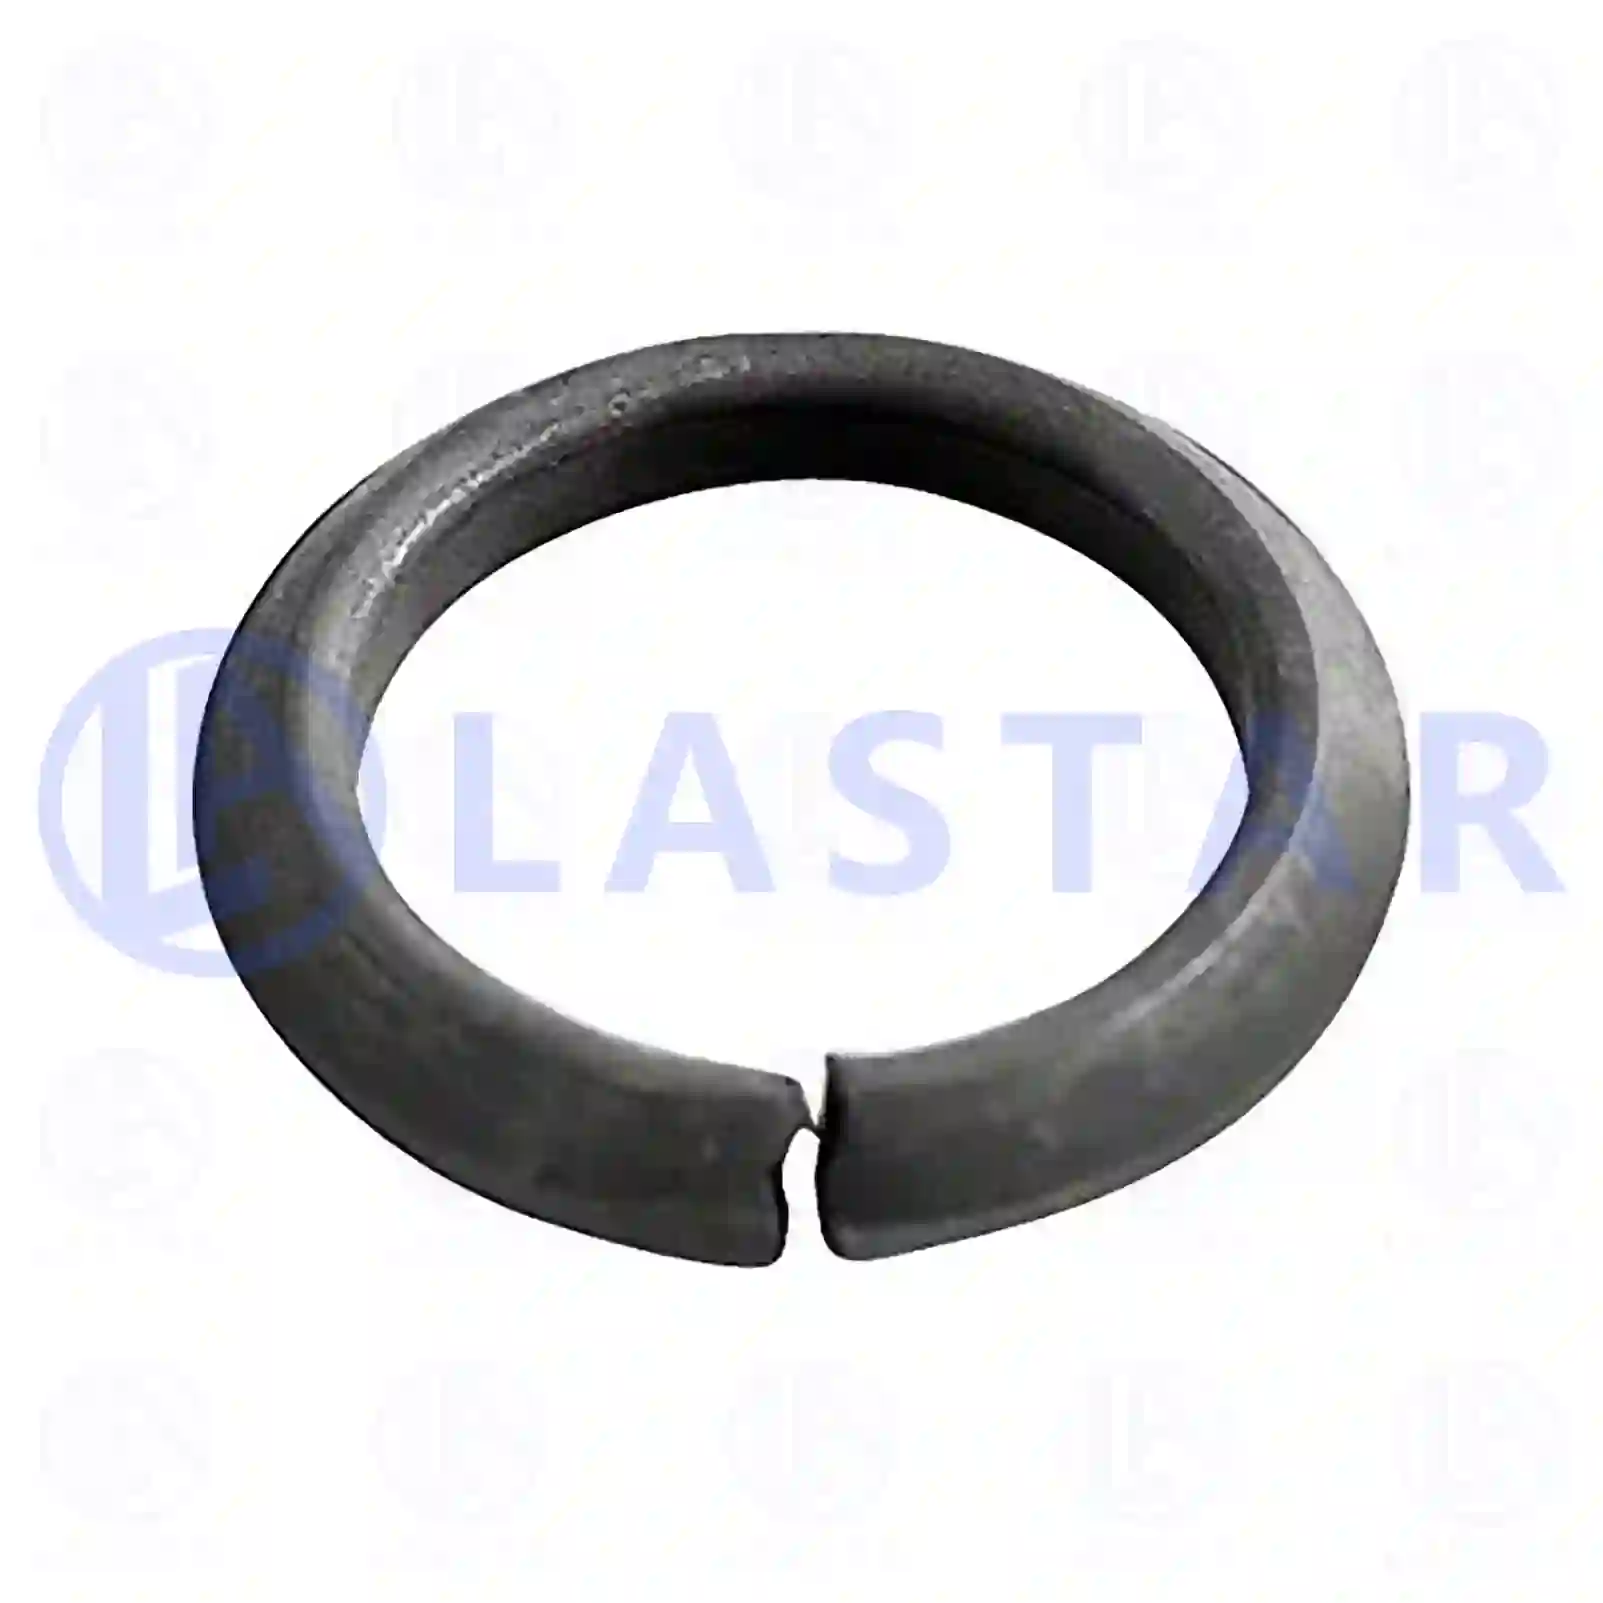 Washer, 77726040, 3249970026, ZG41886-0008, ||  77726040 Lastar Spare Part | Truck Spare Parts, Auotomotive Spare Parts Washer, 77726040, 3249970026, ZG41886-0008, ||  77726040 Lastar Spare Part | Truck Spare Parts, Auotomotive Spare Parts